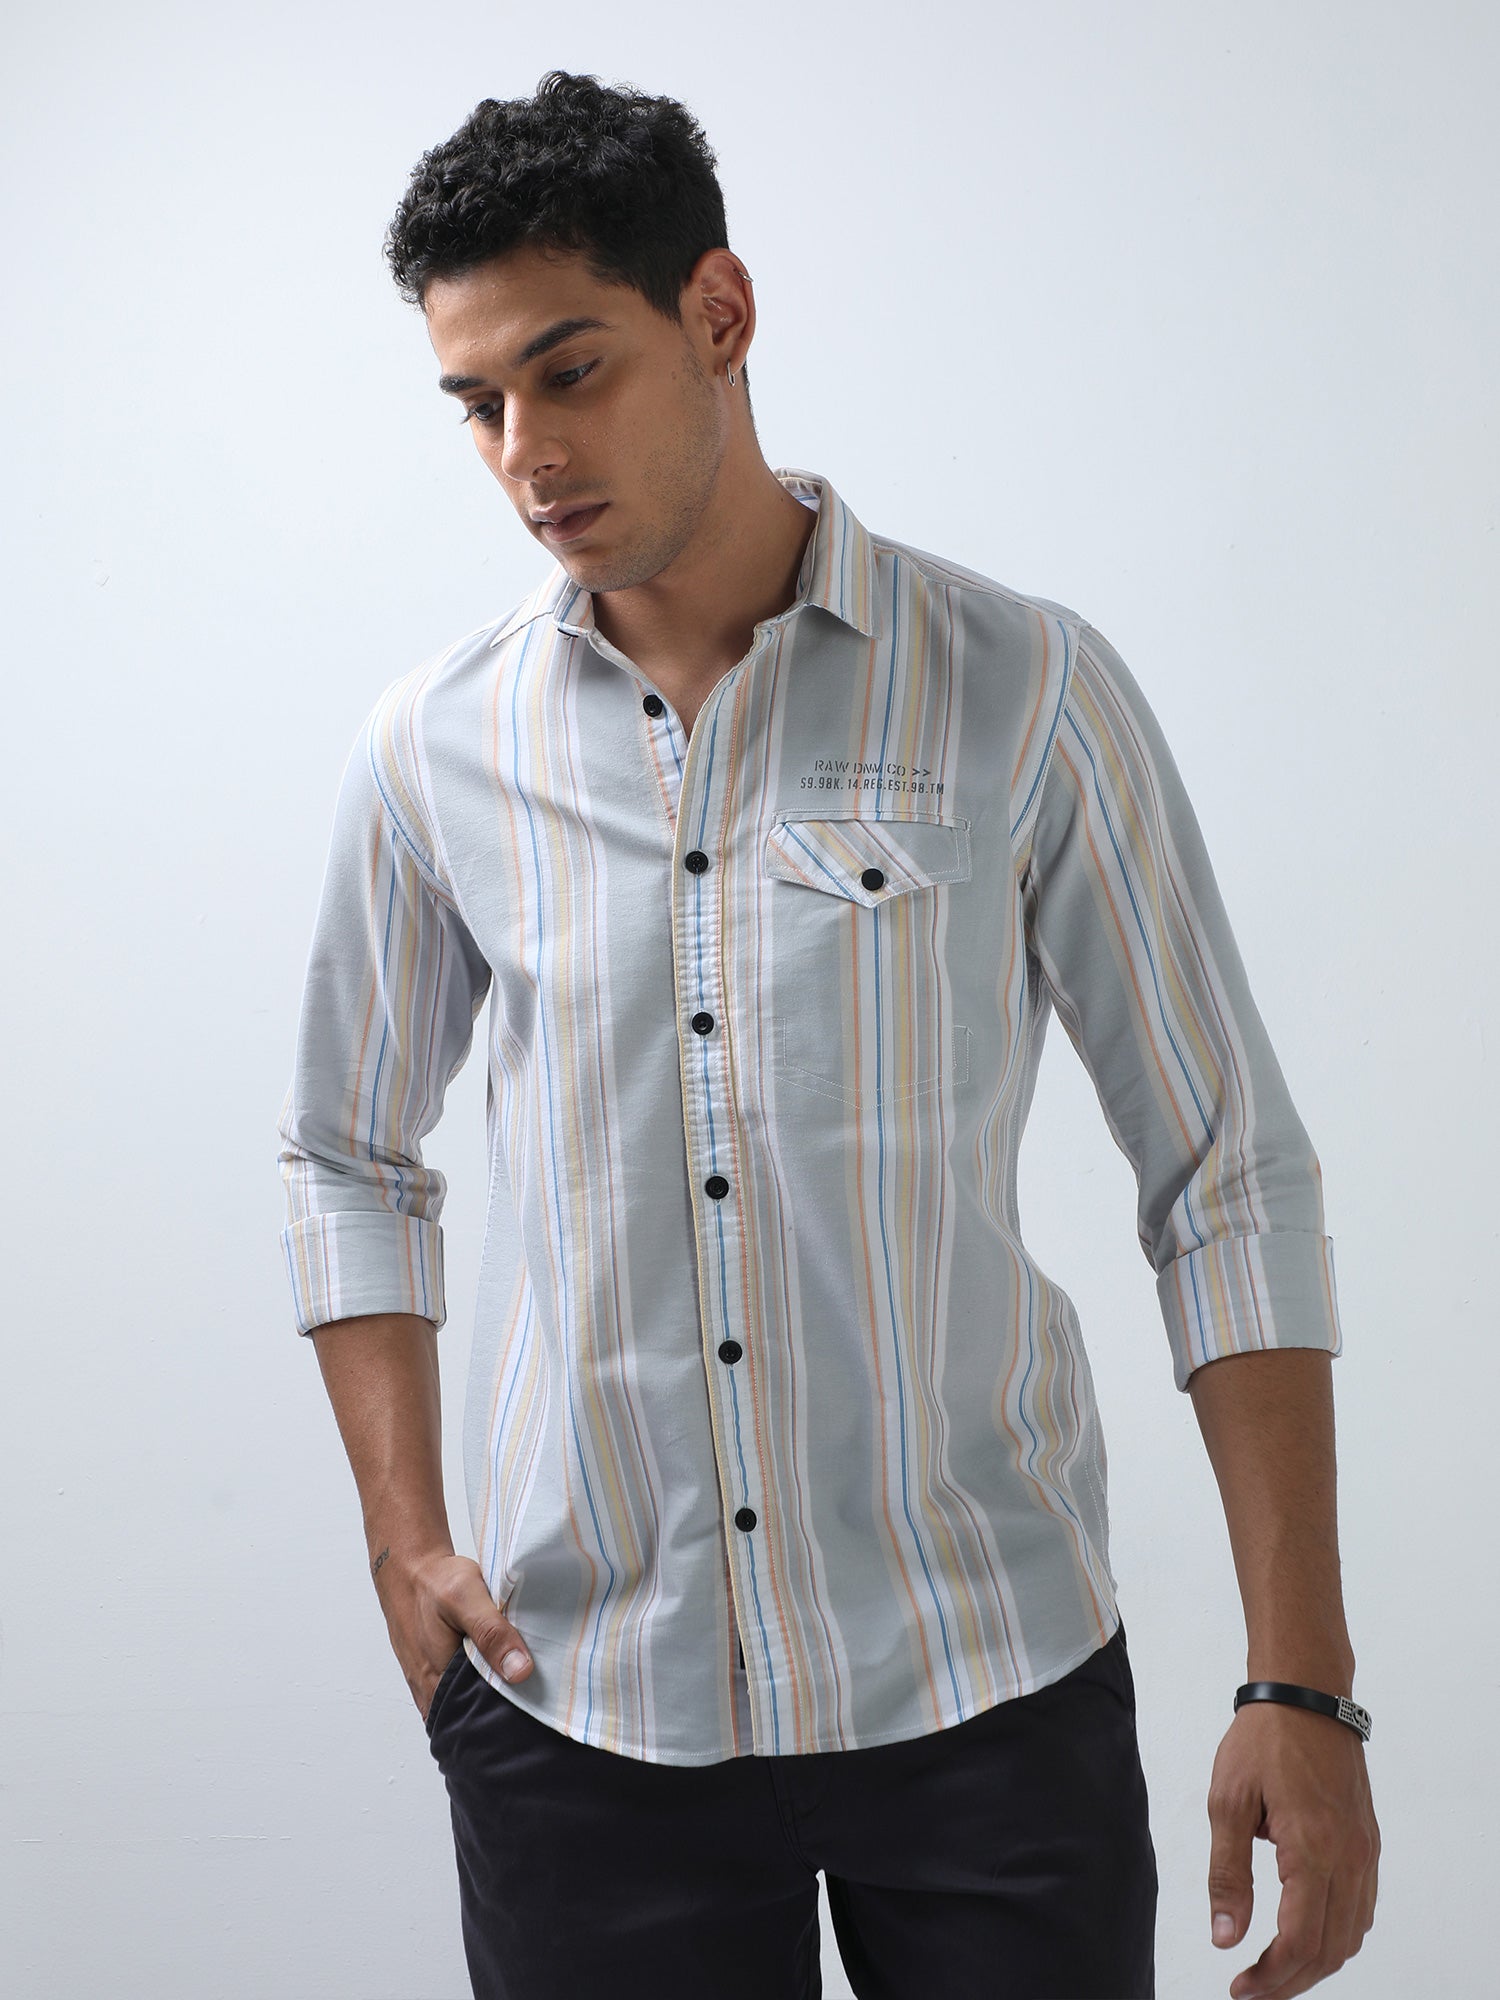 Shop Latest Slate Grey Cotton Striped Shirt OnlineRs. 1349.00